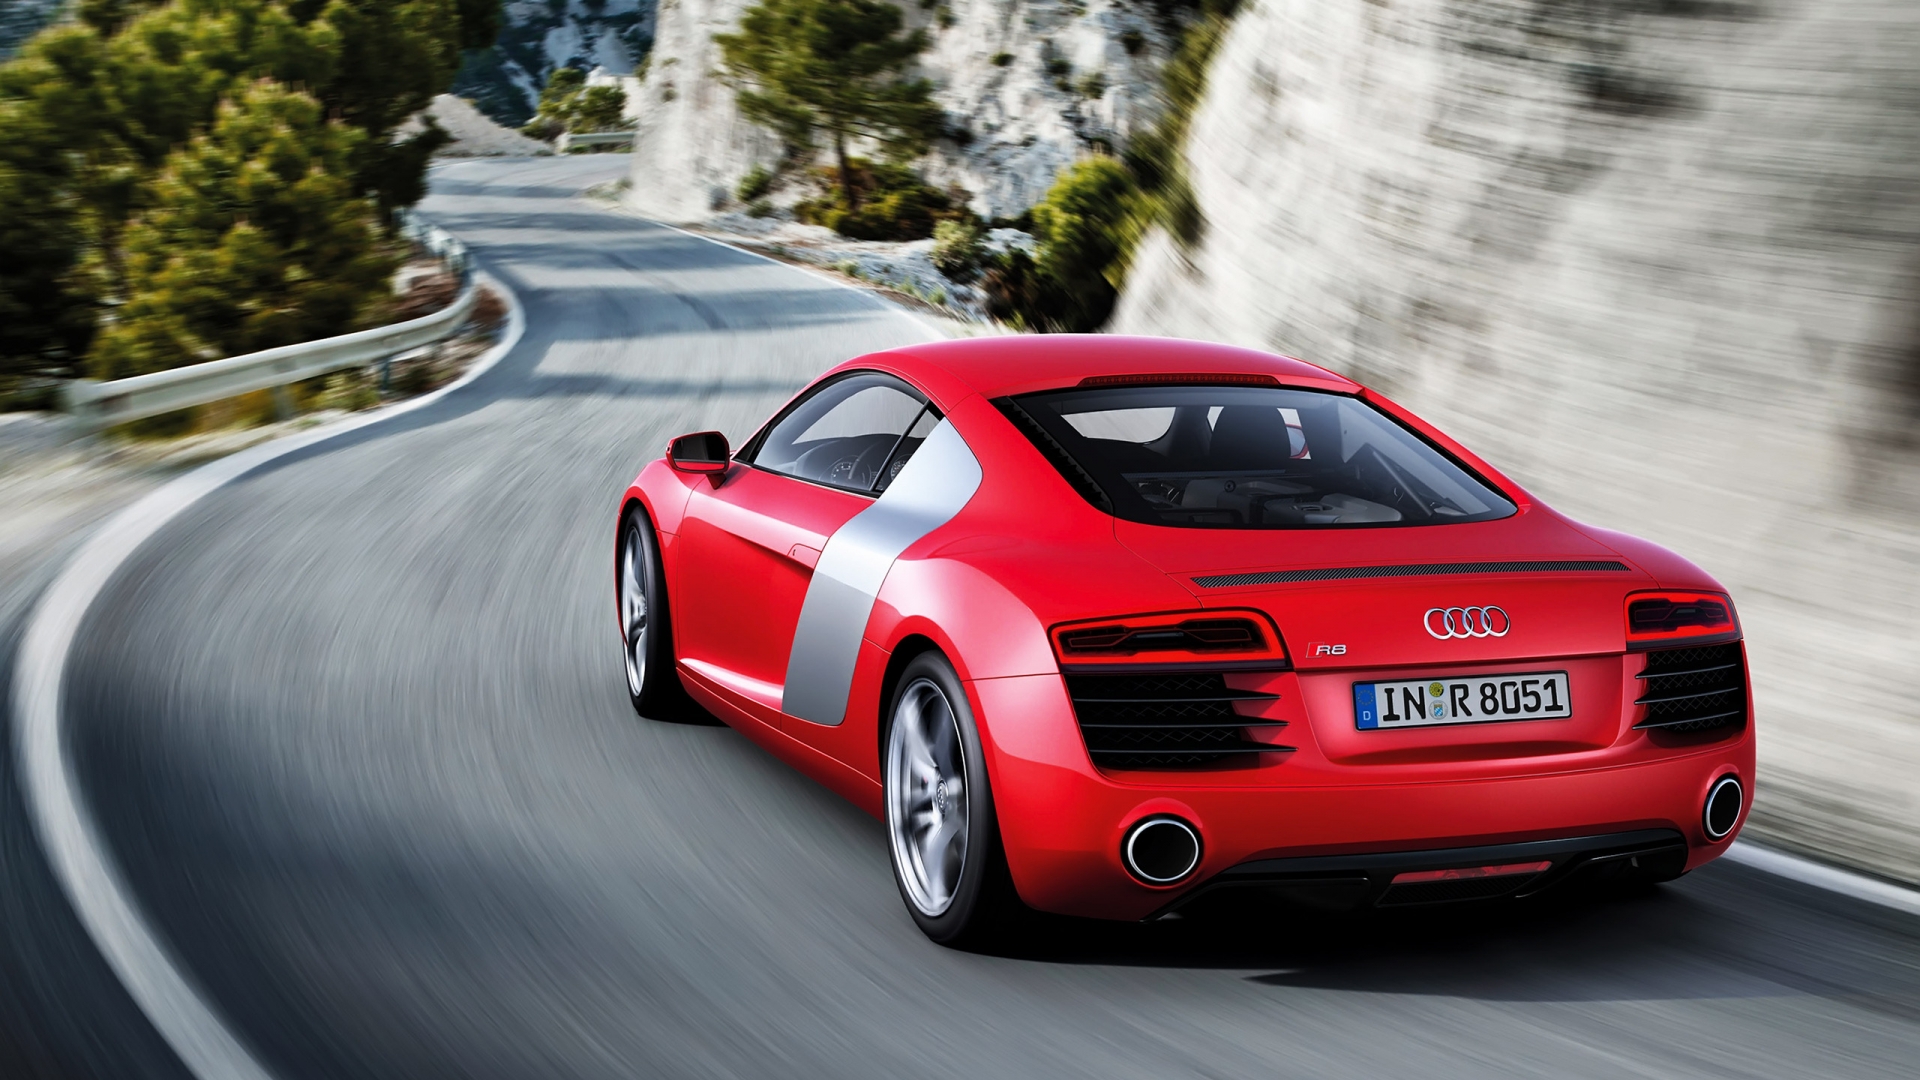 Gorgeous Red Audi R8 2013 for 1920 x 1080 HDTV 1080p resolution